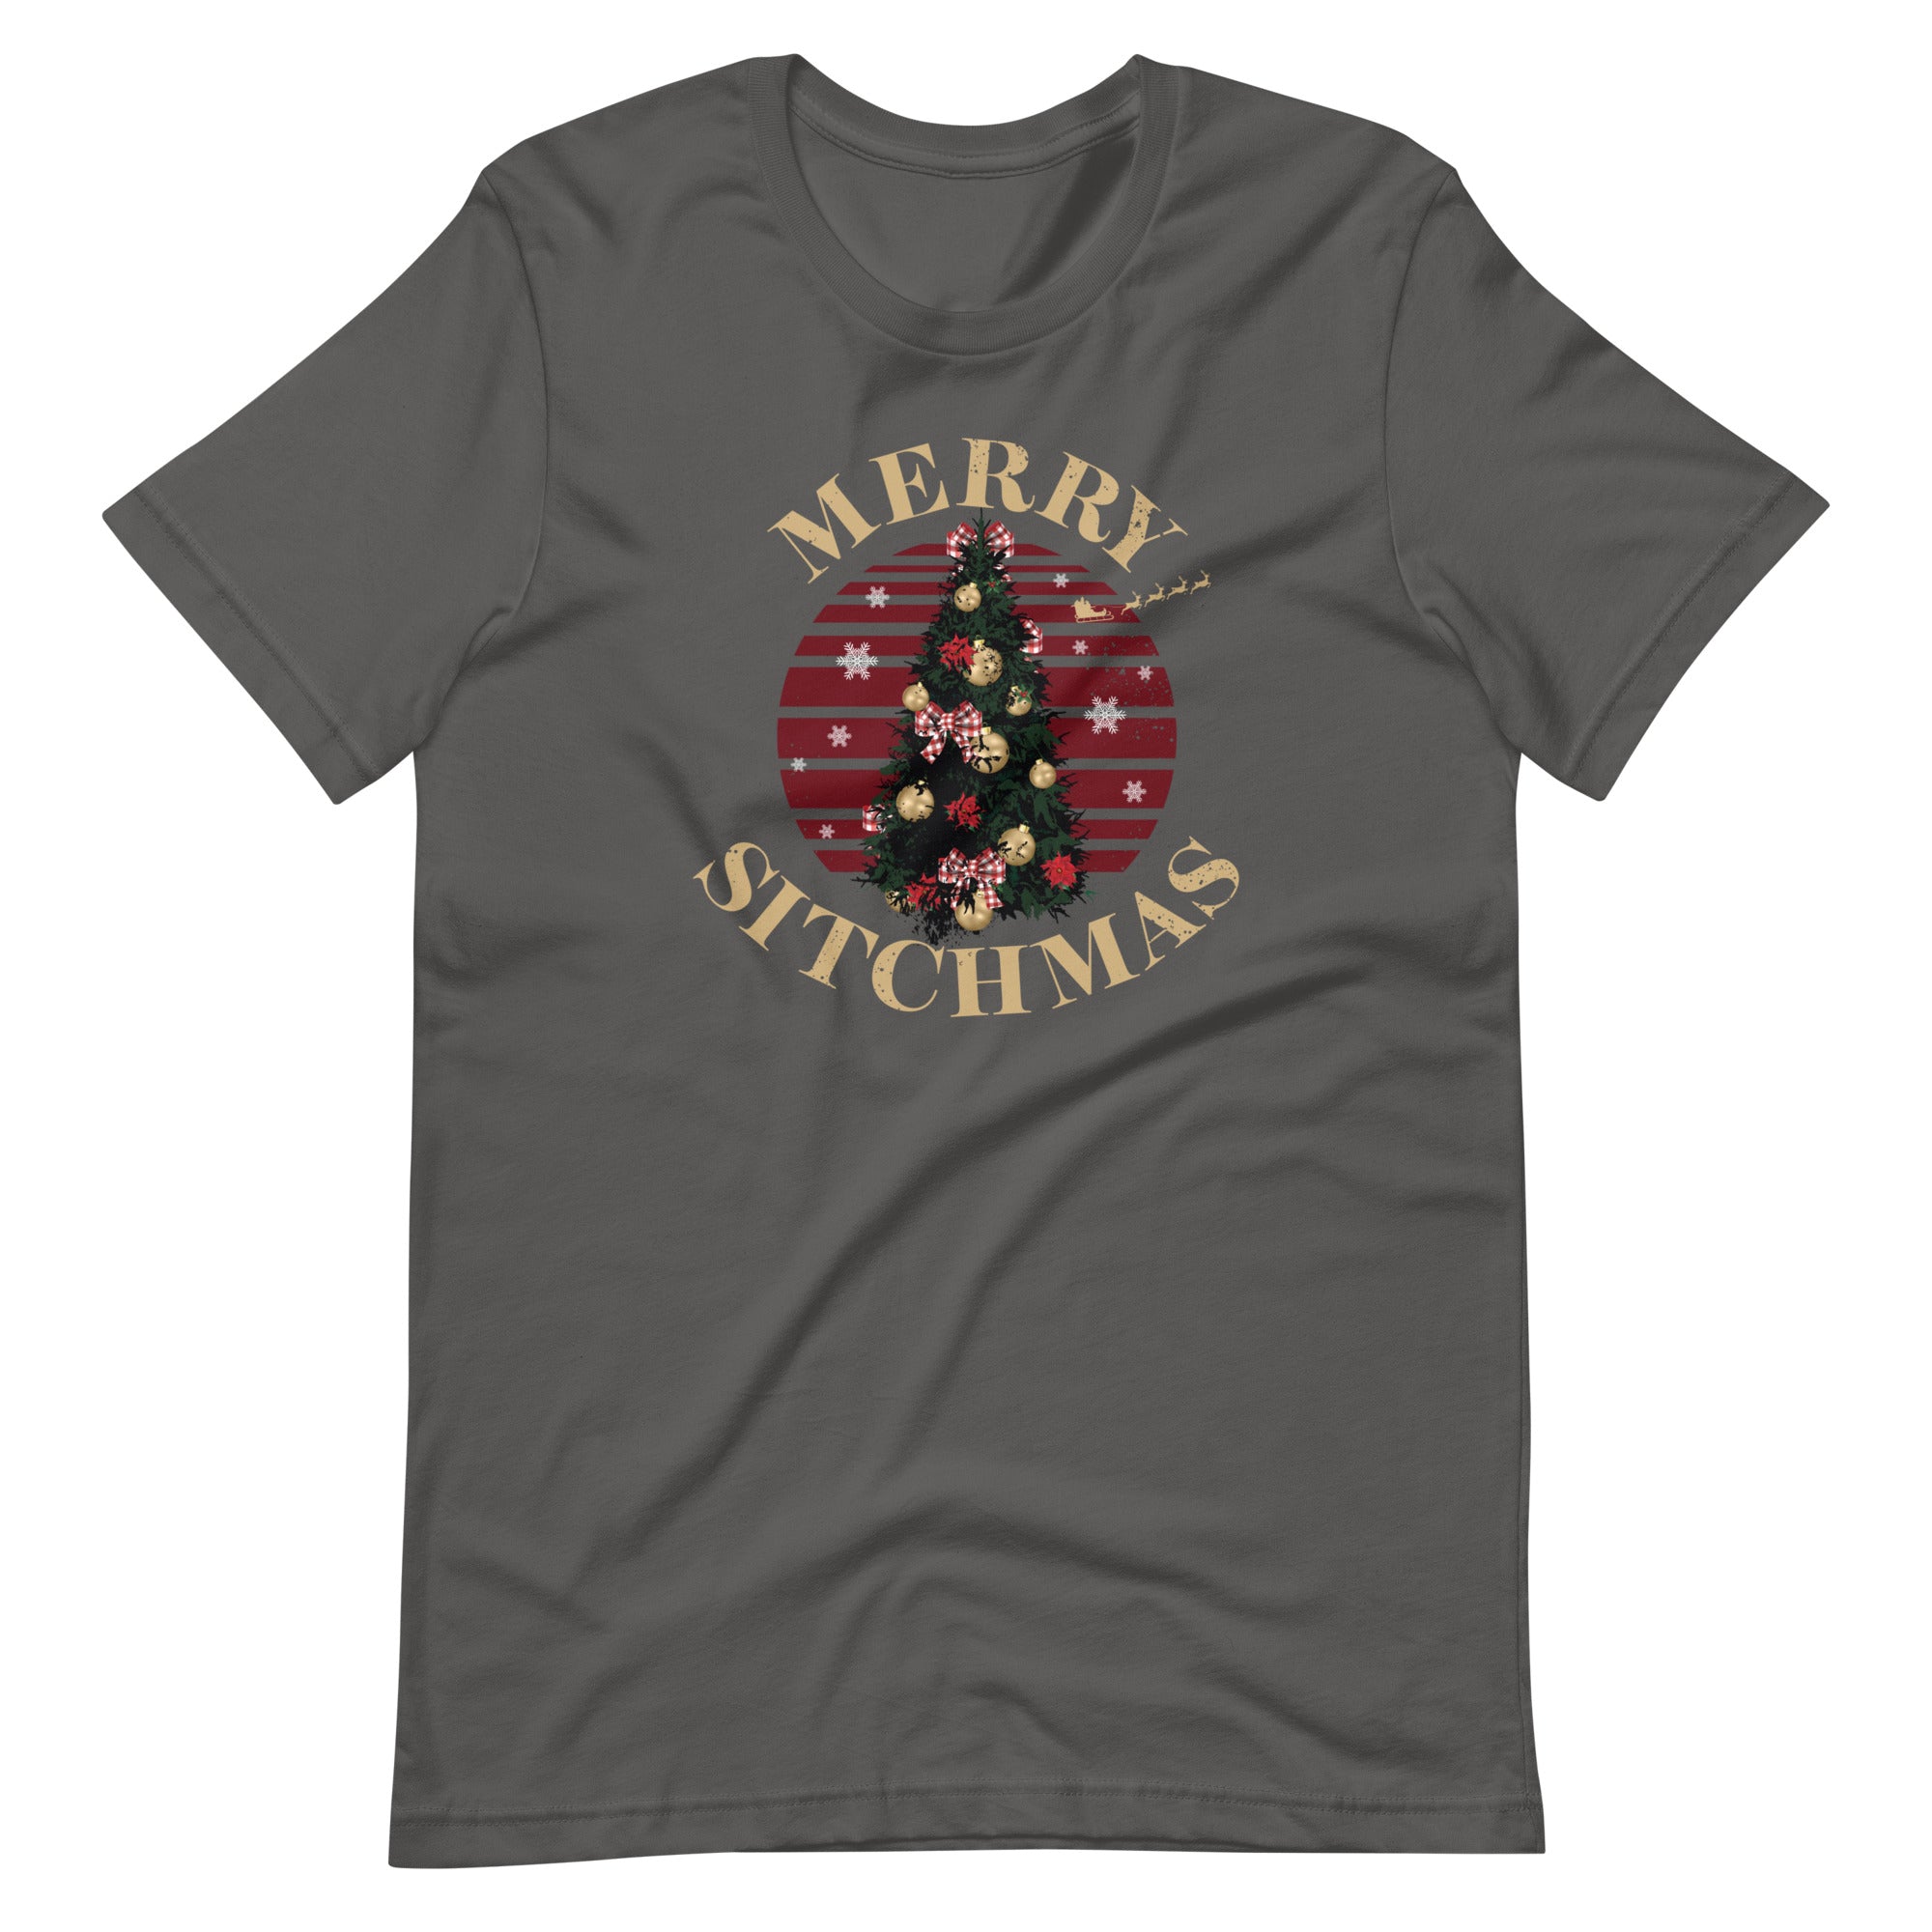 Mike Sorrentino Merry Sitchmas Shirt